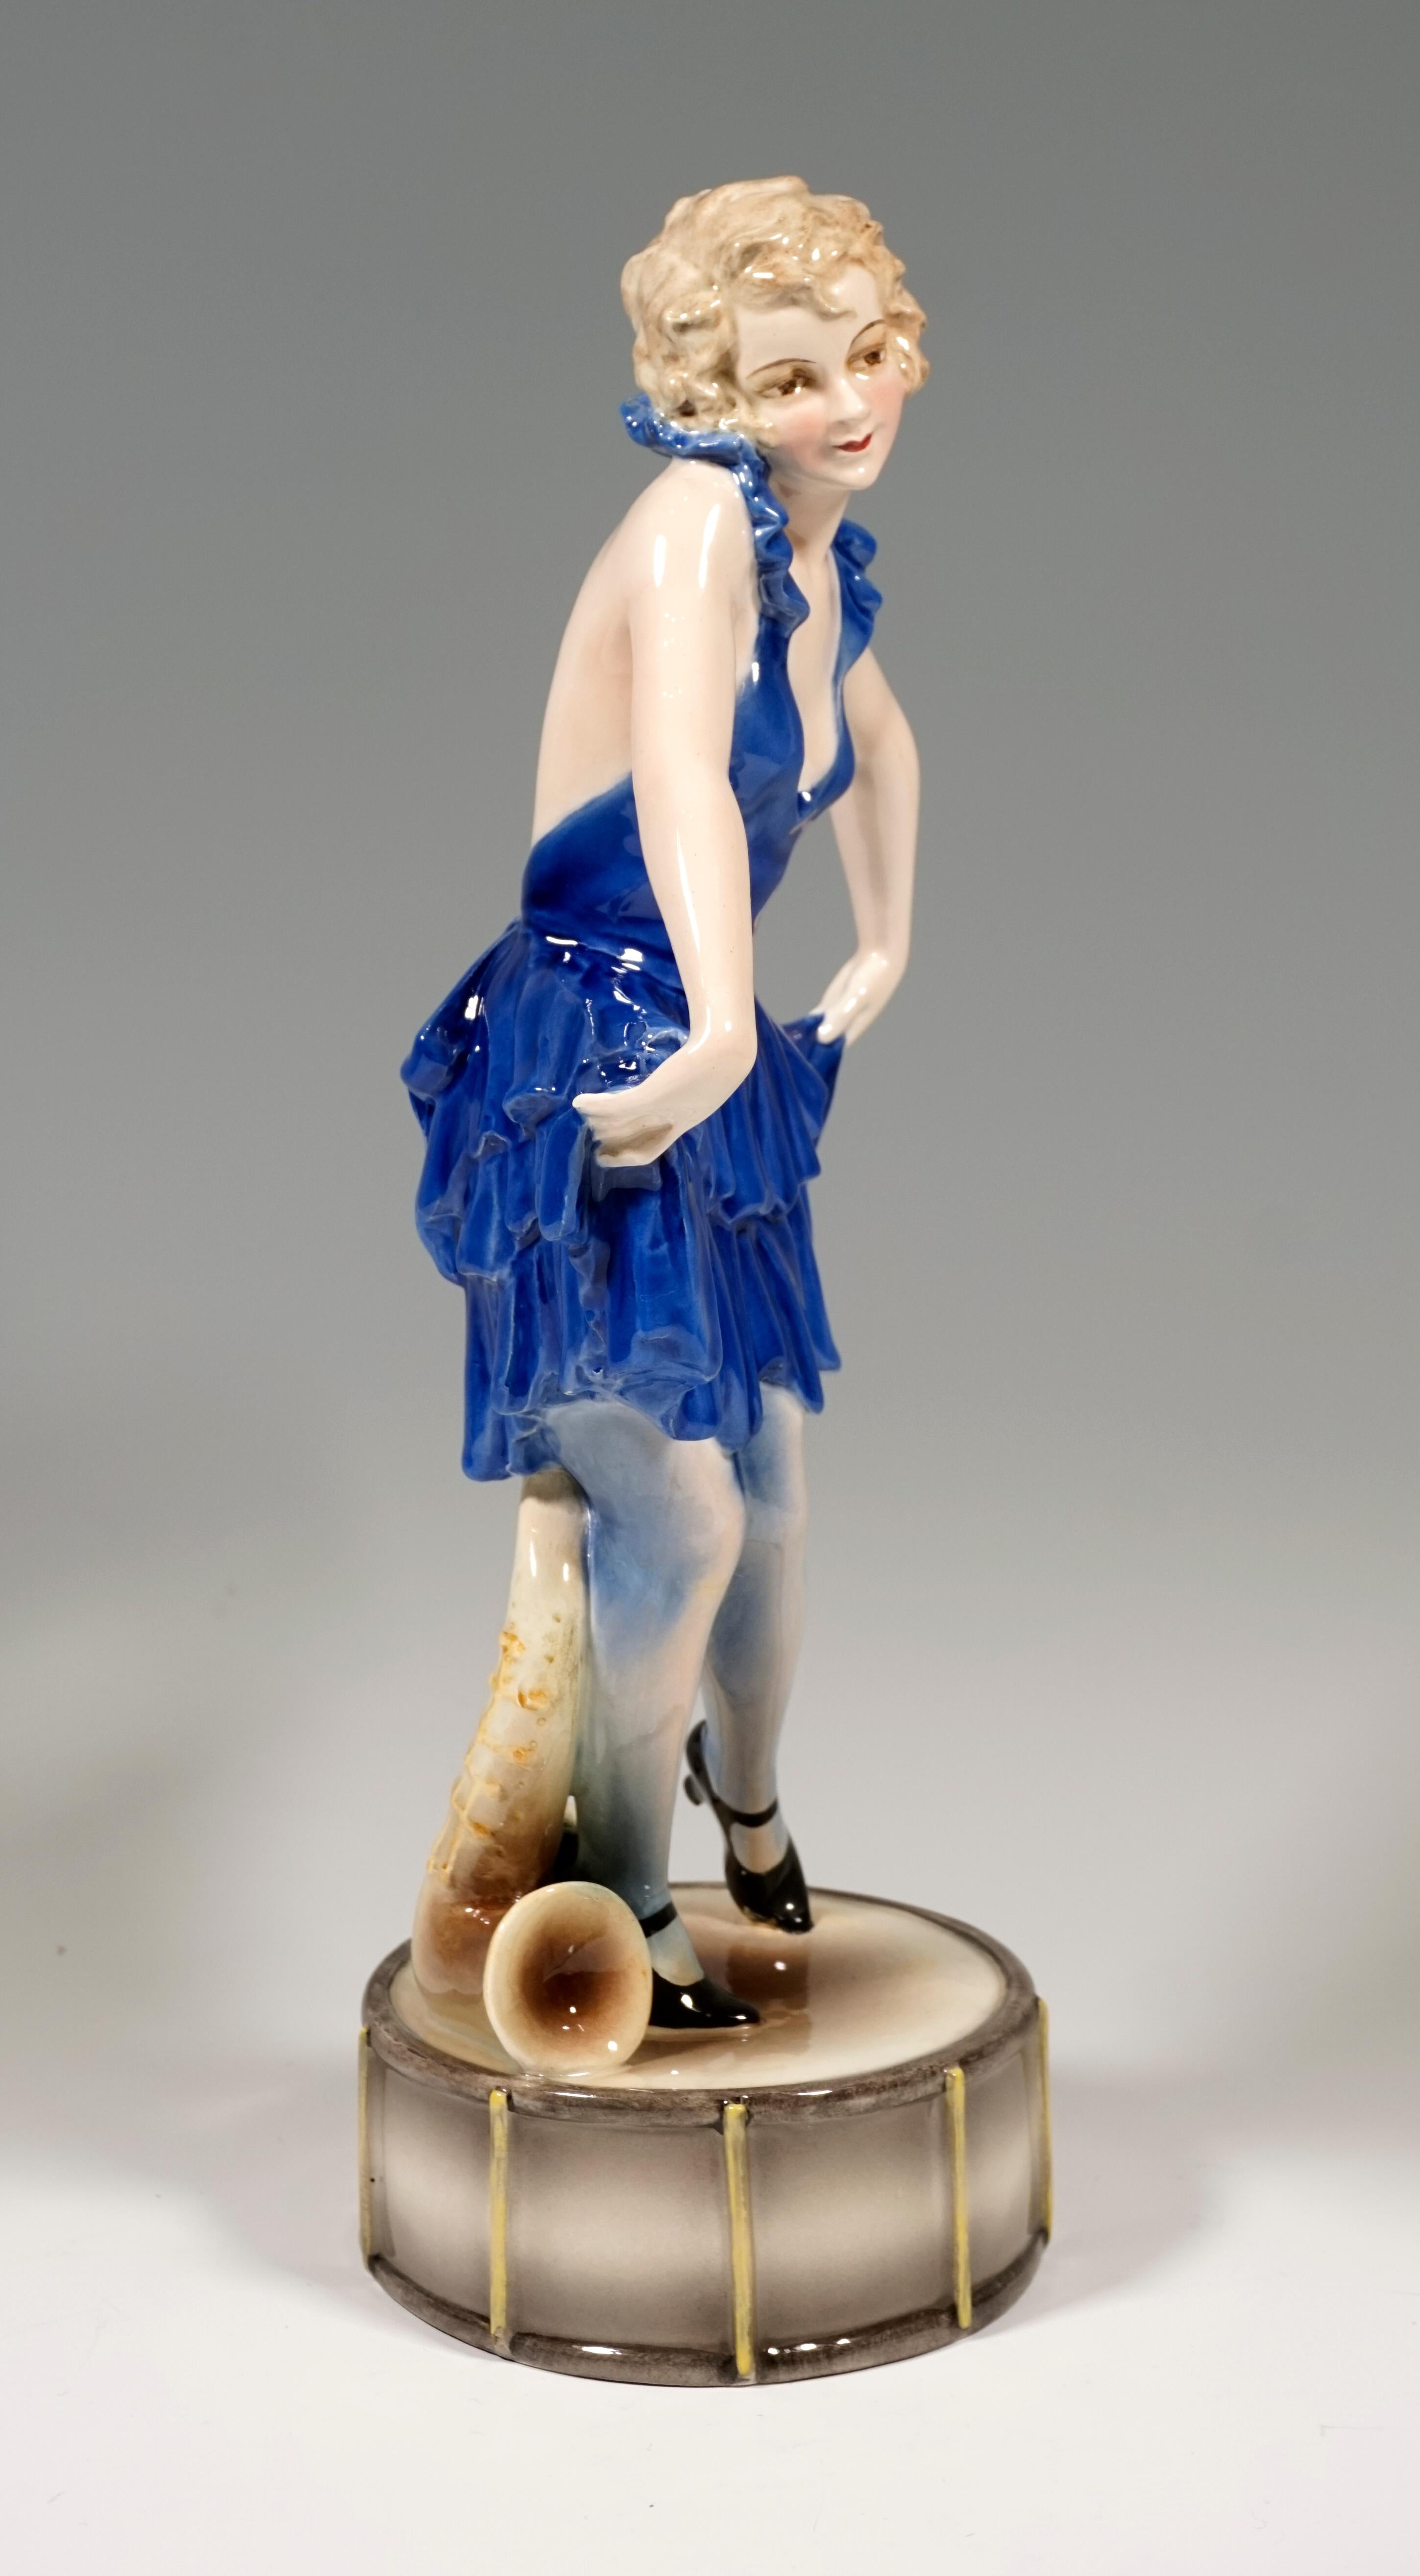 Very rare Goldscheider Art Deco ceramic figure of the 1920's:
Representation of a young variety dancer in pose. She wears a short, low-cut, blue ruffled dress, the skirt ends of which she holds up on both sides and curtsies.
The young lady is